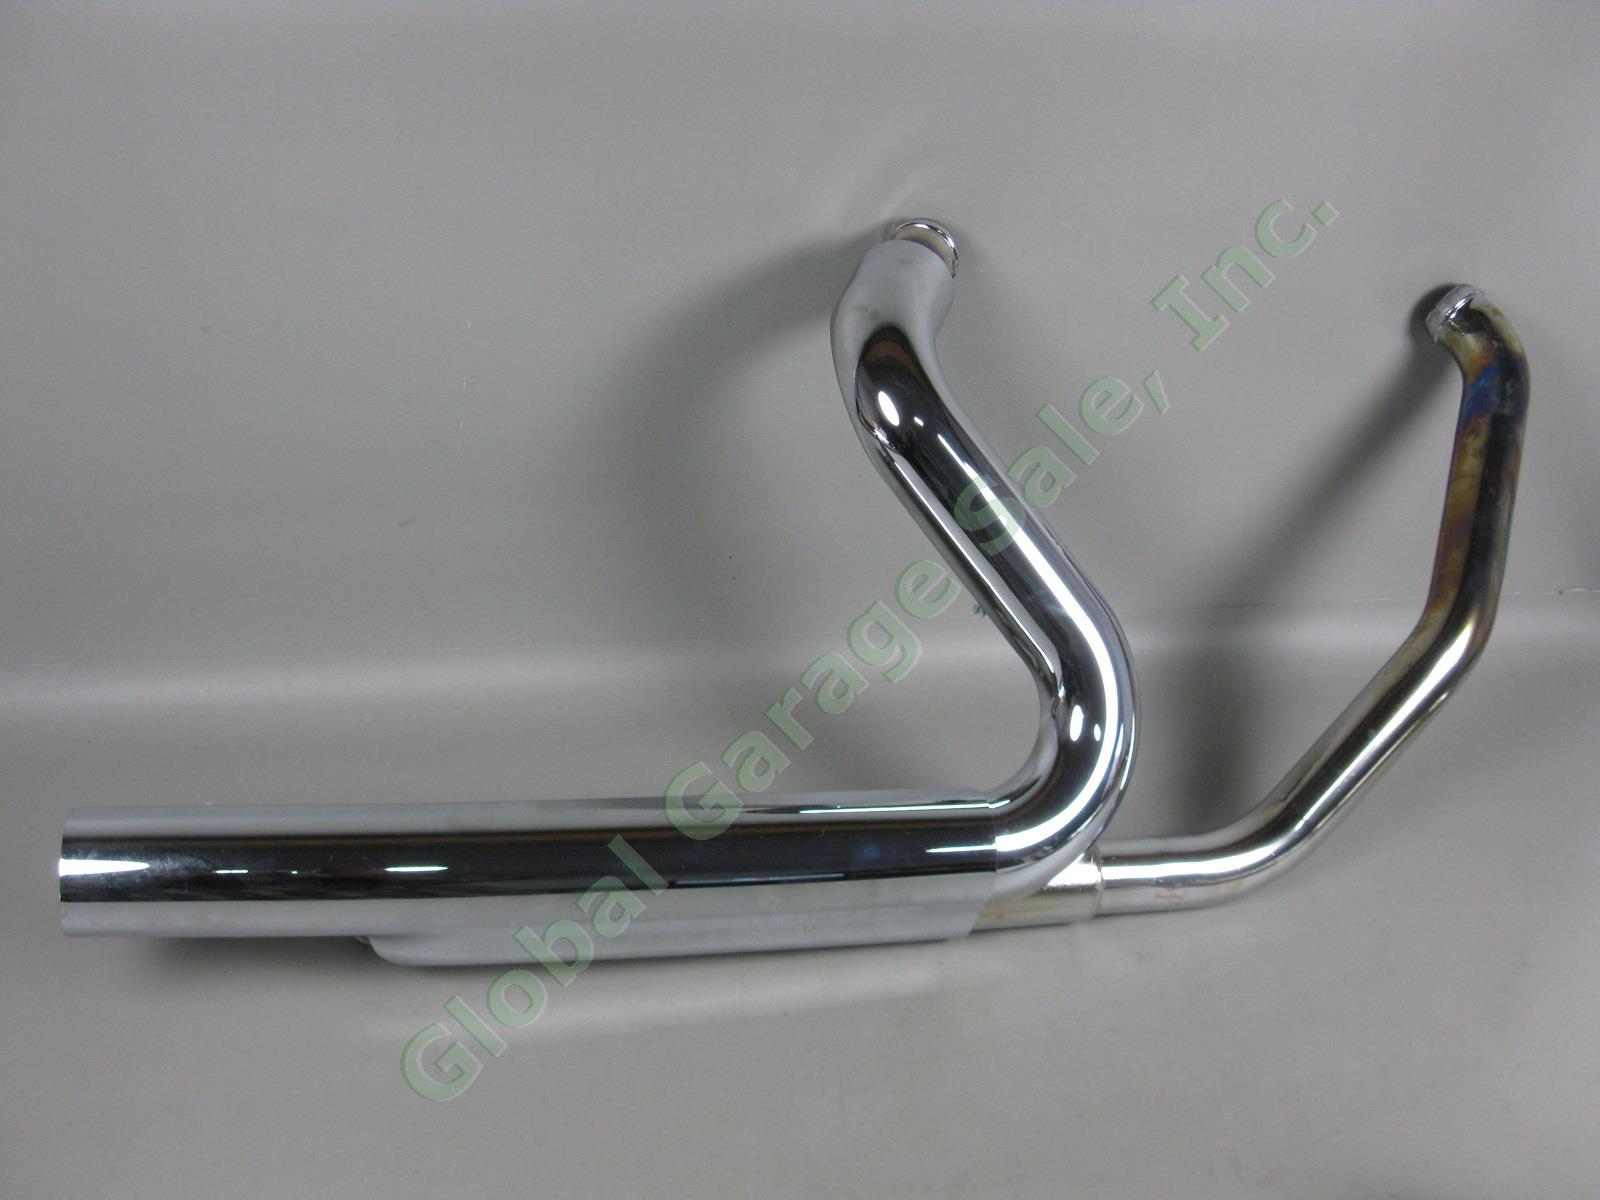 2013 Harley Davidson Street Glide Touring Exhaust Pipes + Slip-Ons + Heat Shield 1